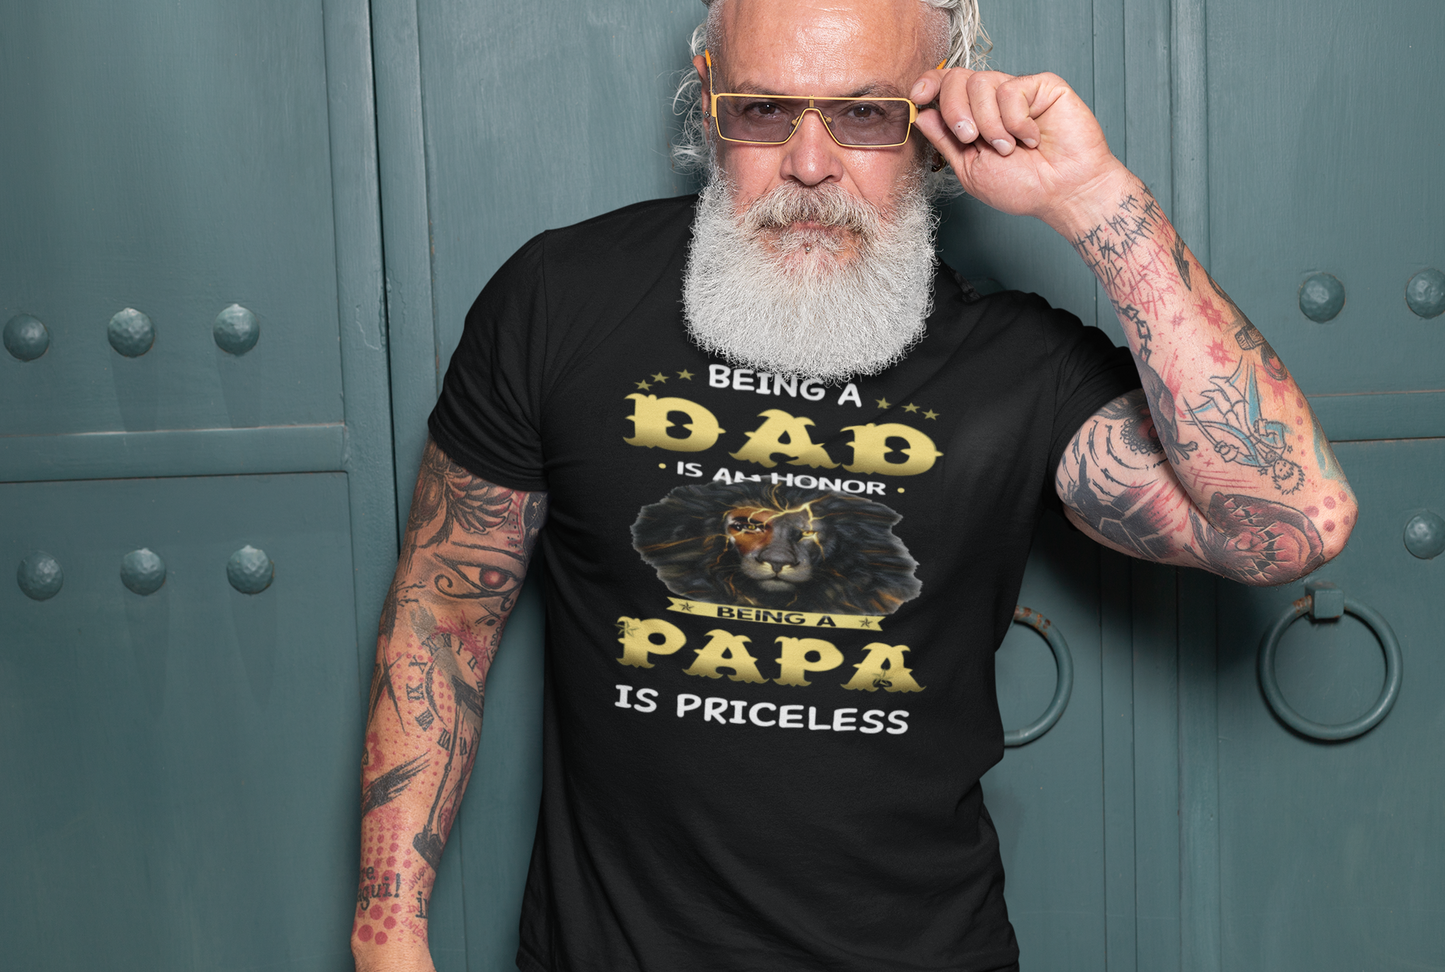 Being Grandpa is an honor being papa is priceless father T-Shirt, Grandpa  Shirt